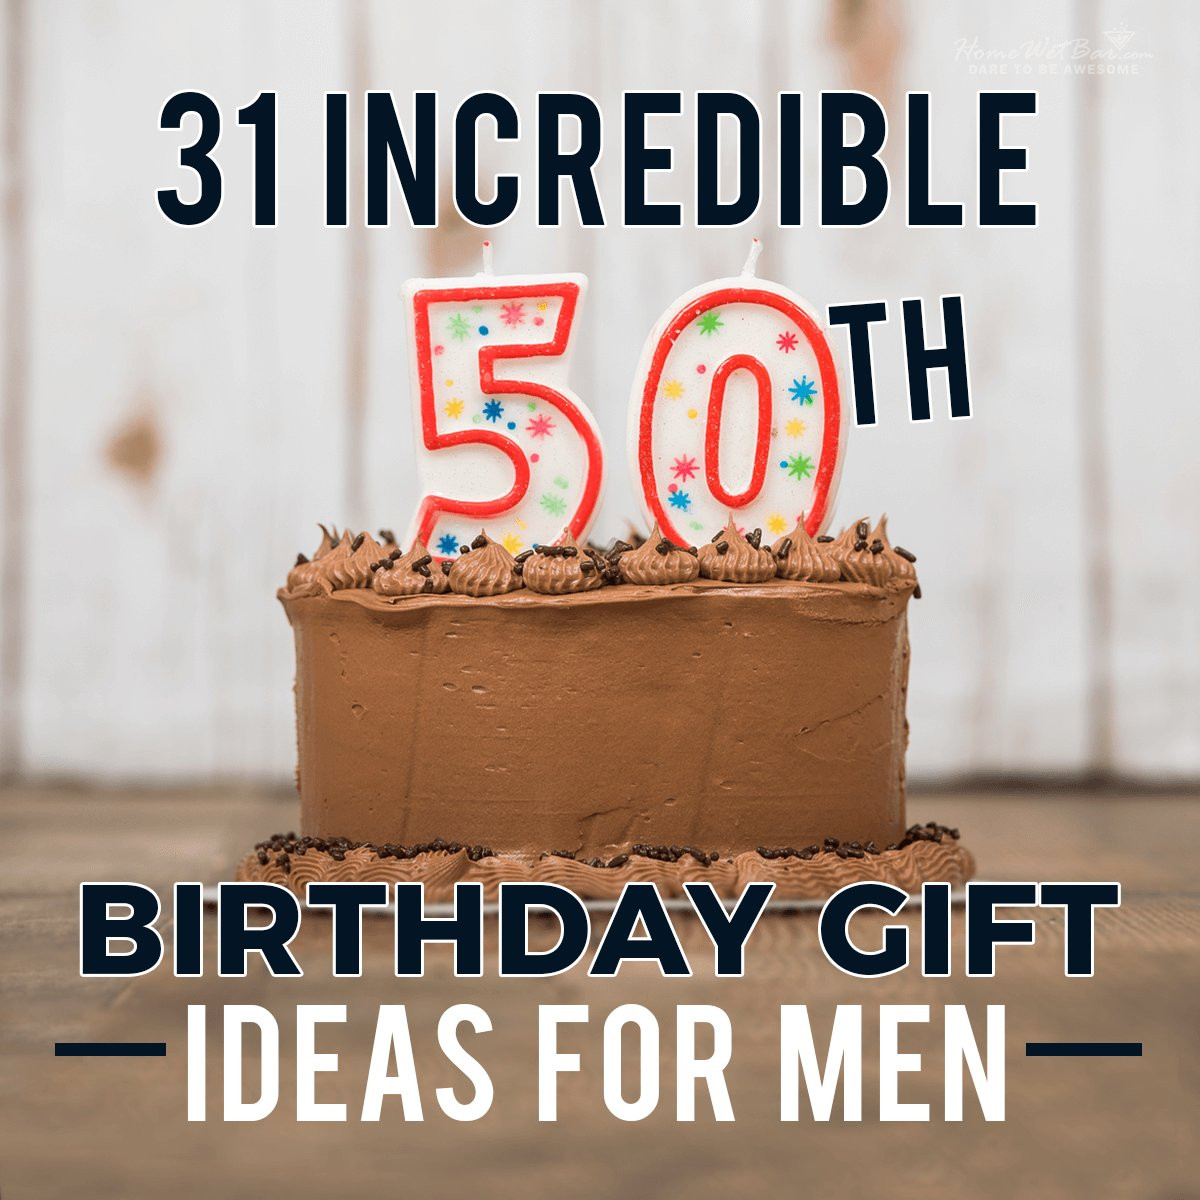 50 Birthday Gift Ideas For Him
 31 Incredible 50th Birthday Gift Ideas for Men